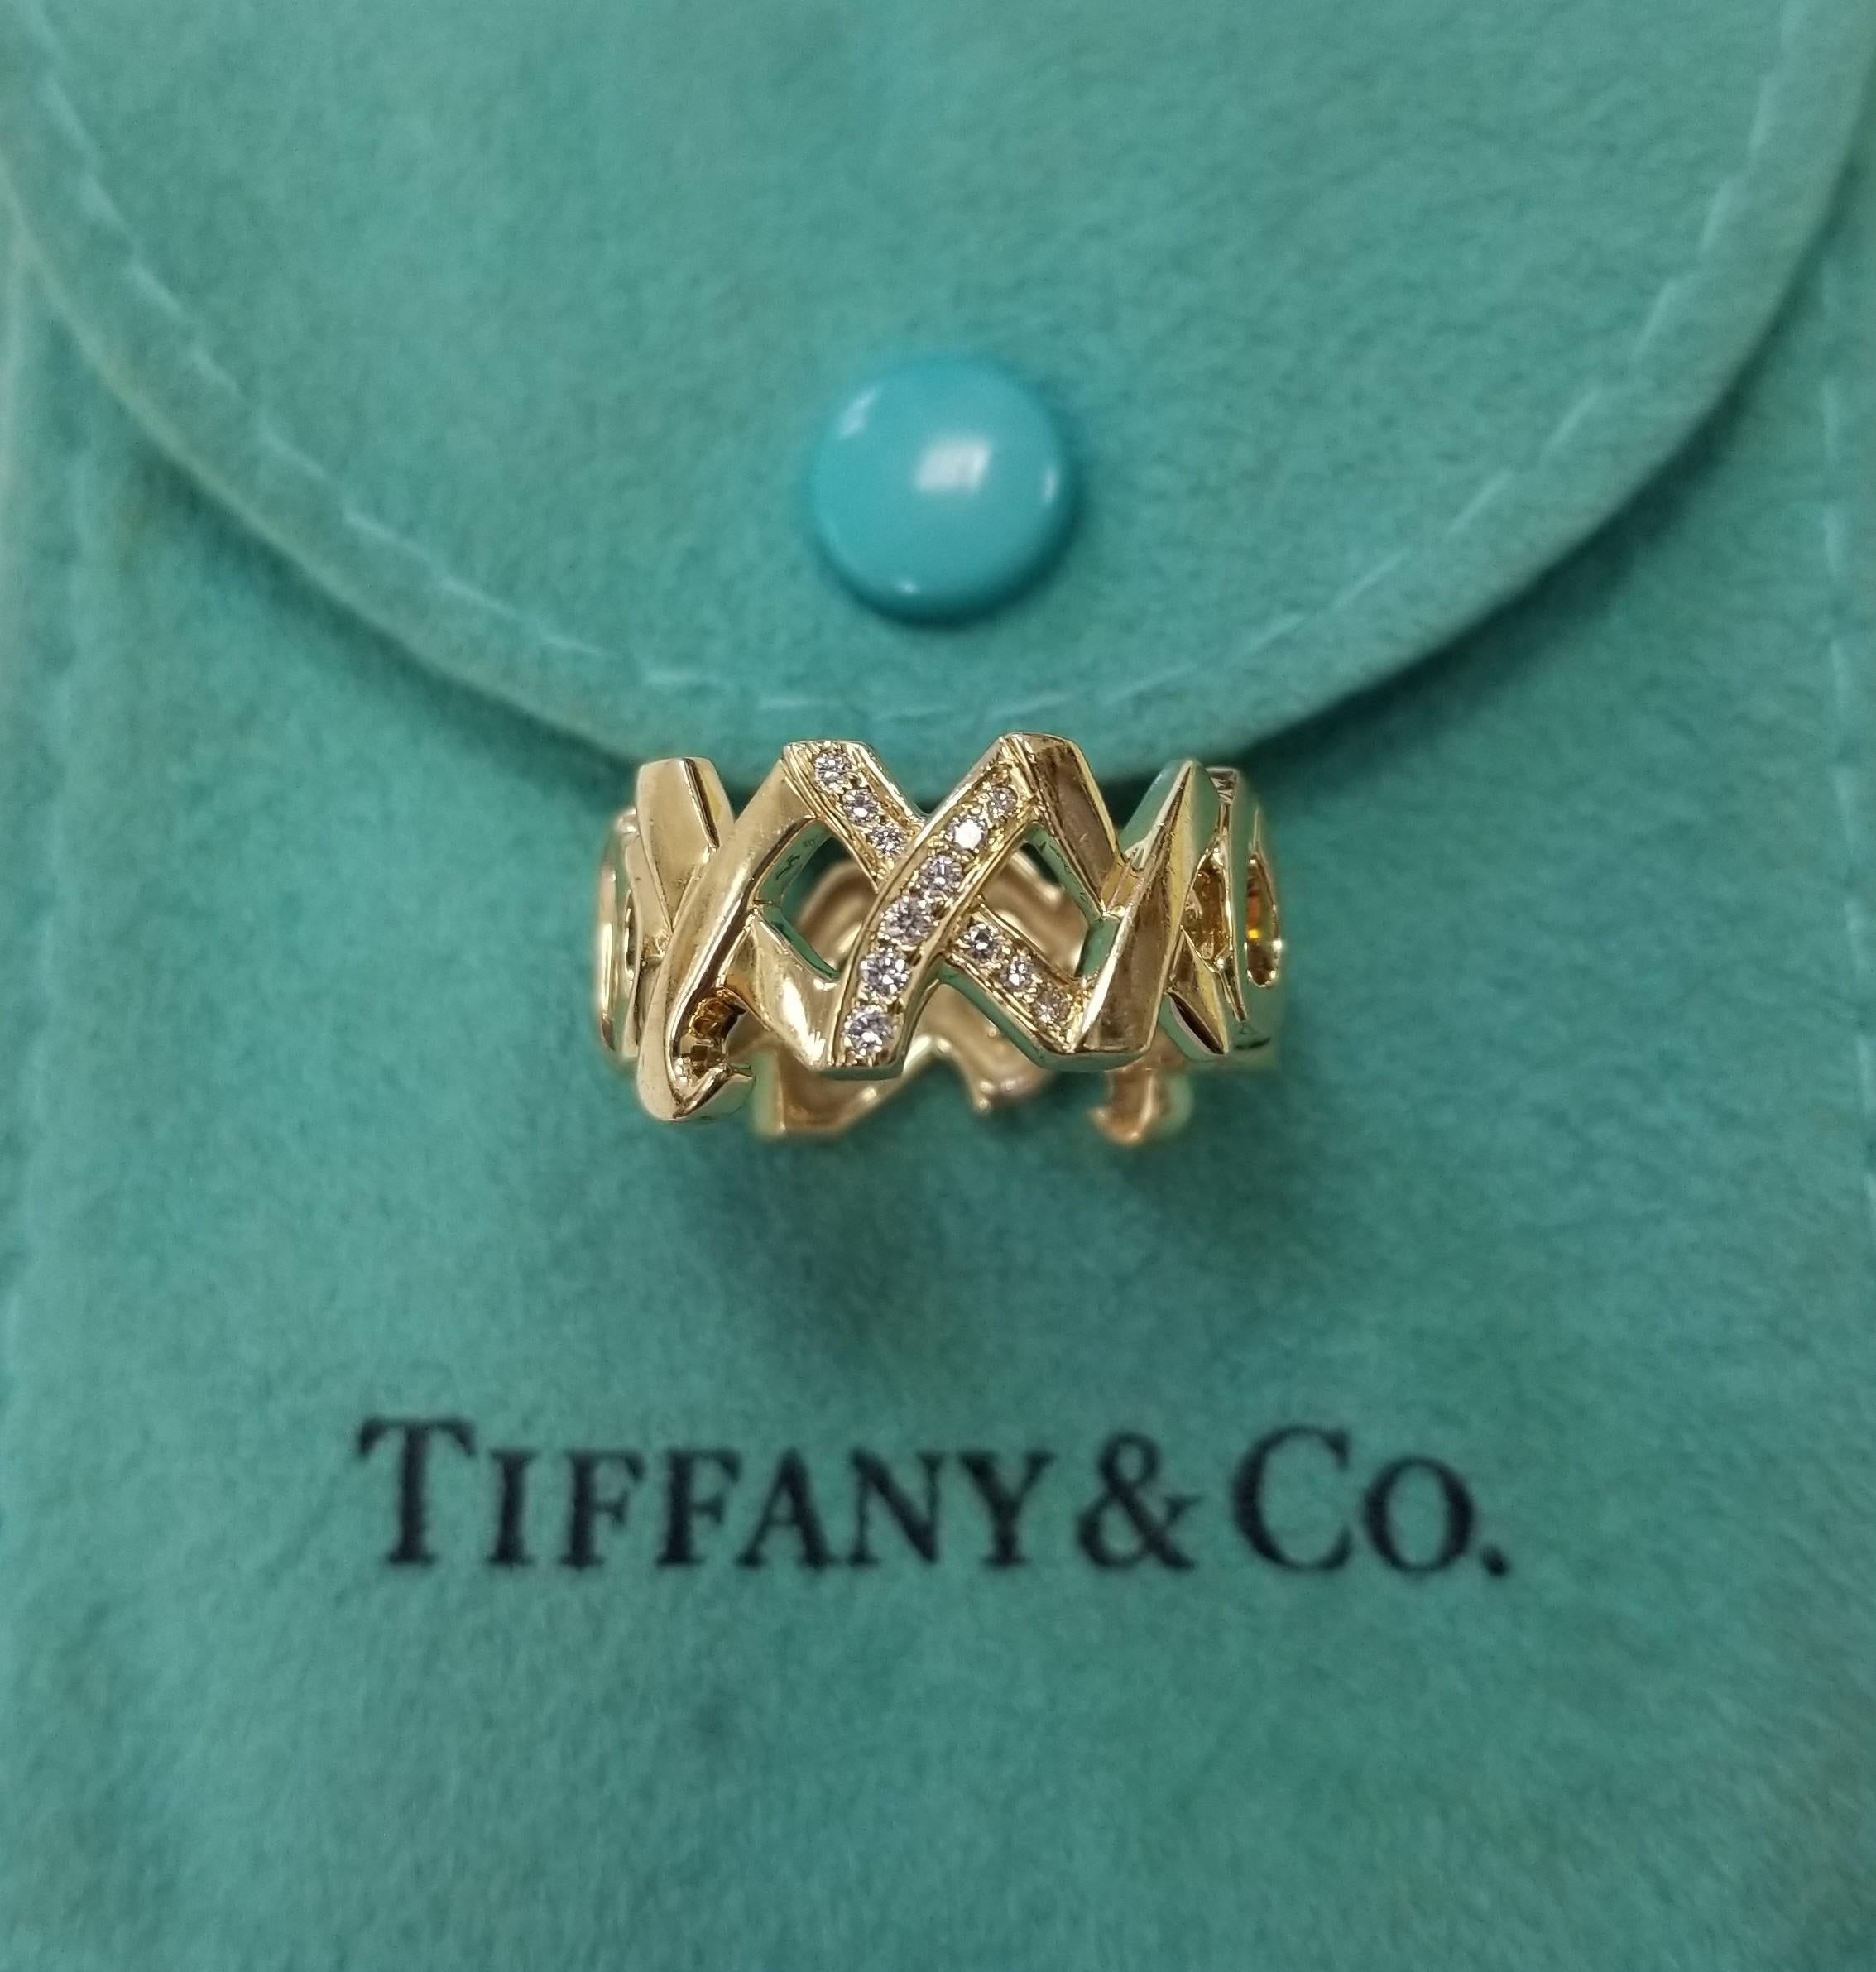 Specifications:
Pre-Owned (Great condition)
Brand: Tiffany & Co
Metal: 18K (Au 79.80-75%) Gold
Stones:  12 Diamonds .24 pts.
-round brilliant cut
Ring Size: 5.5
Width: 10.2 mm
Weight: 7.1 grams
Stamps: 